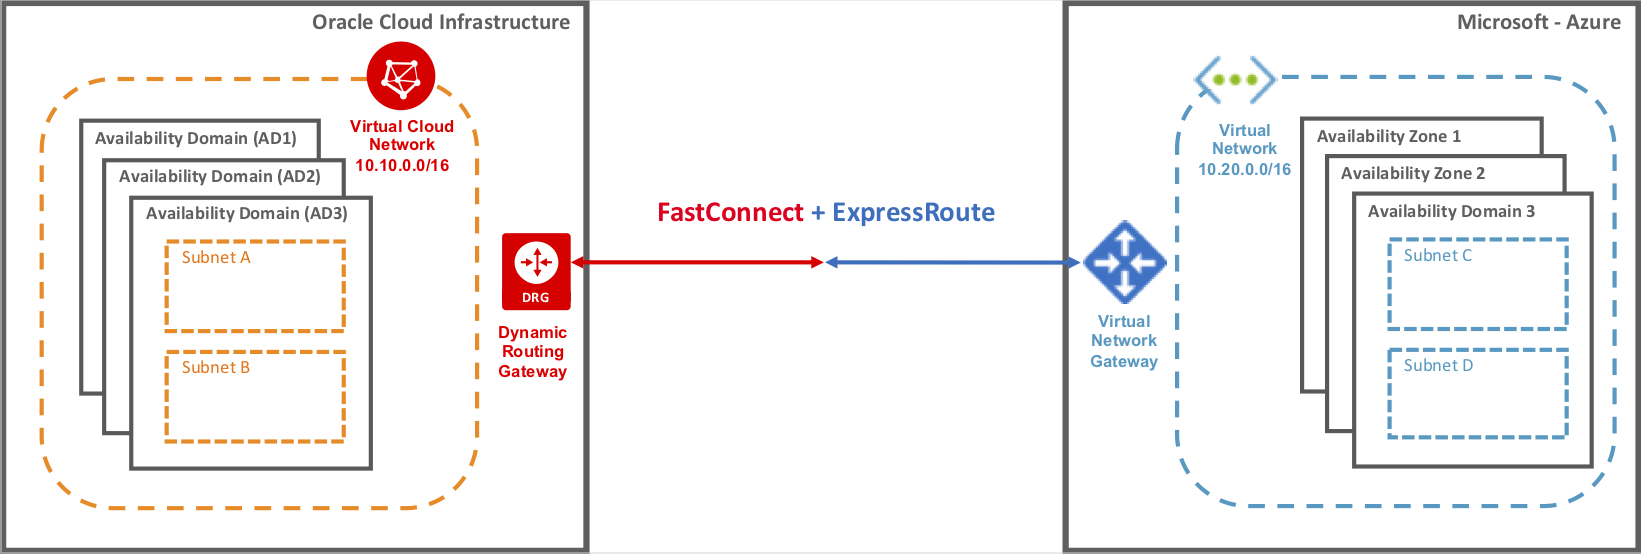 Azure OCI Connect